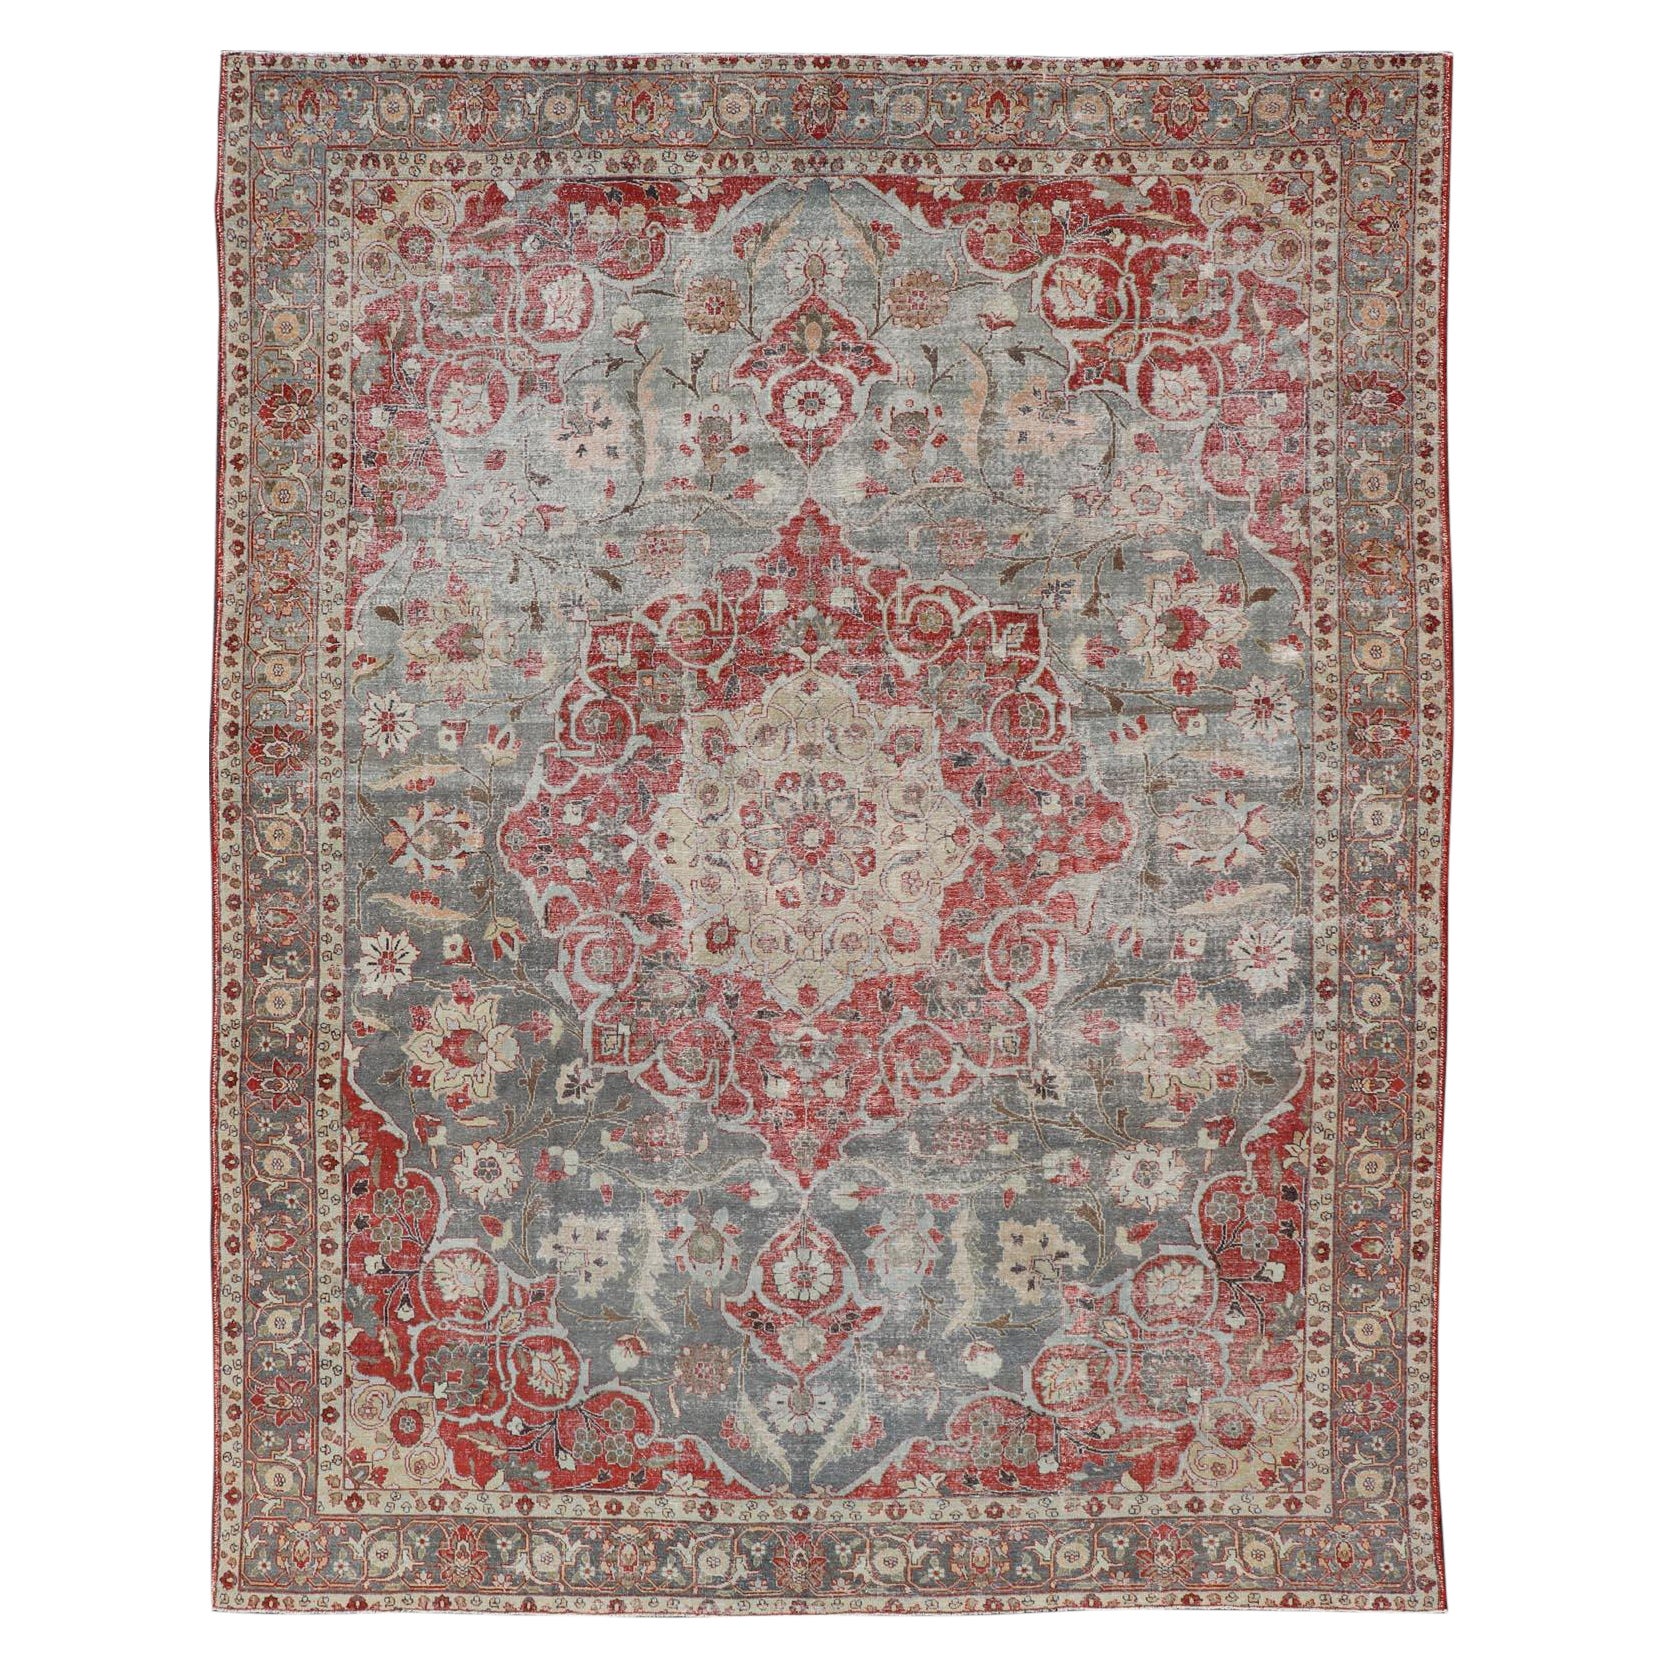 Antique Persian Tabriz Rug with Floral Medallion Design in Tan, Red, and Lt Blue